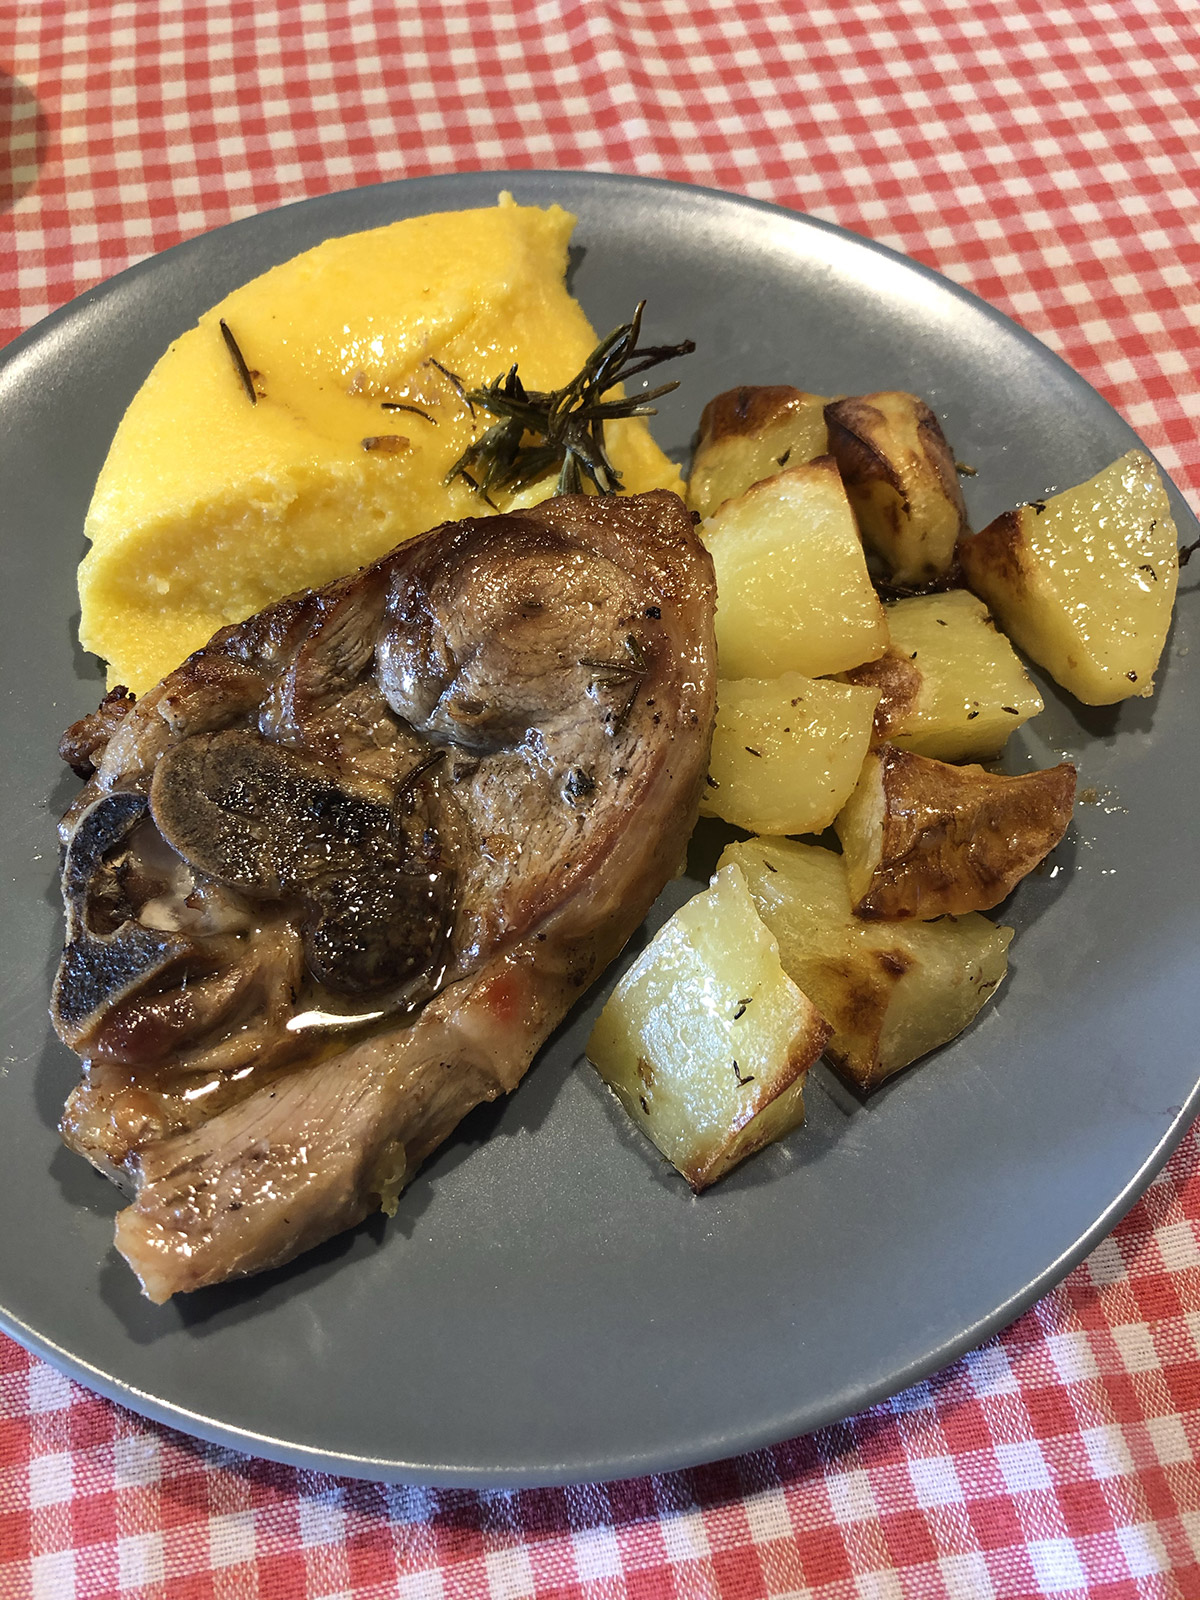 BAKED LAMB WITH POTATOES